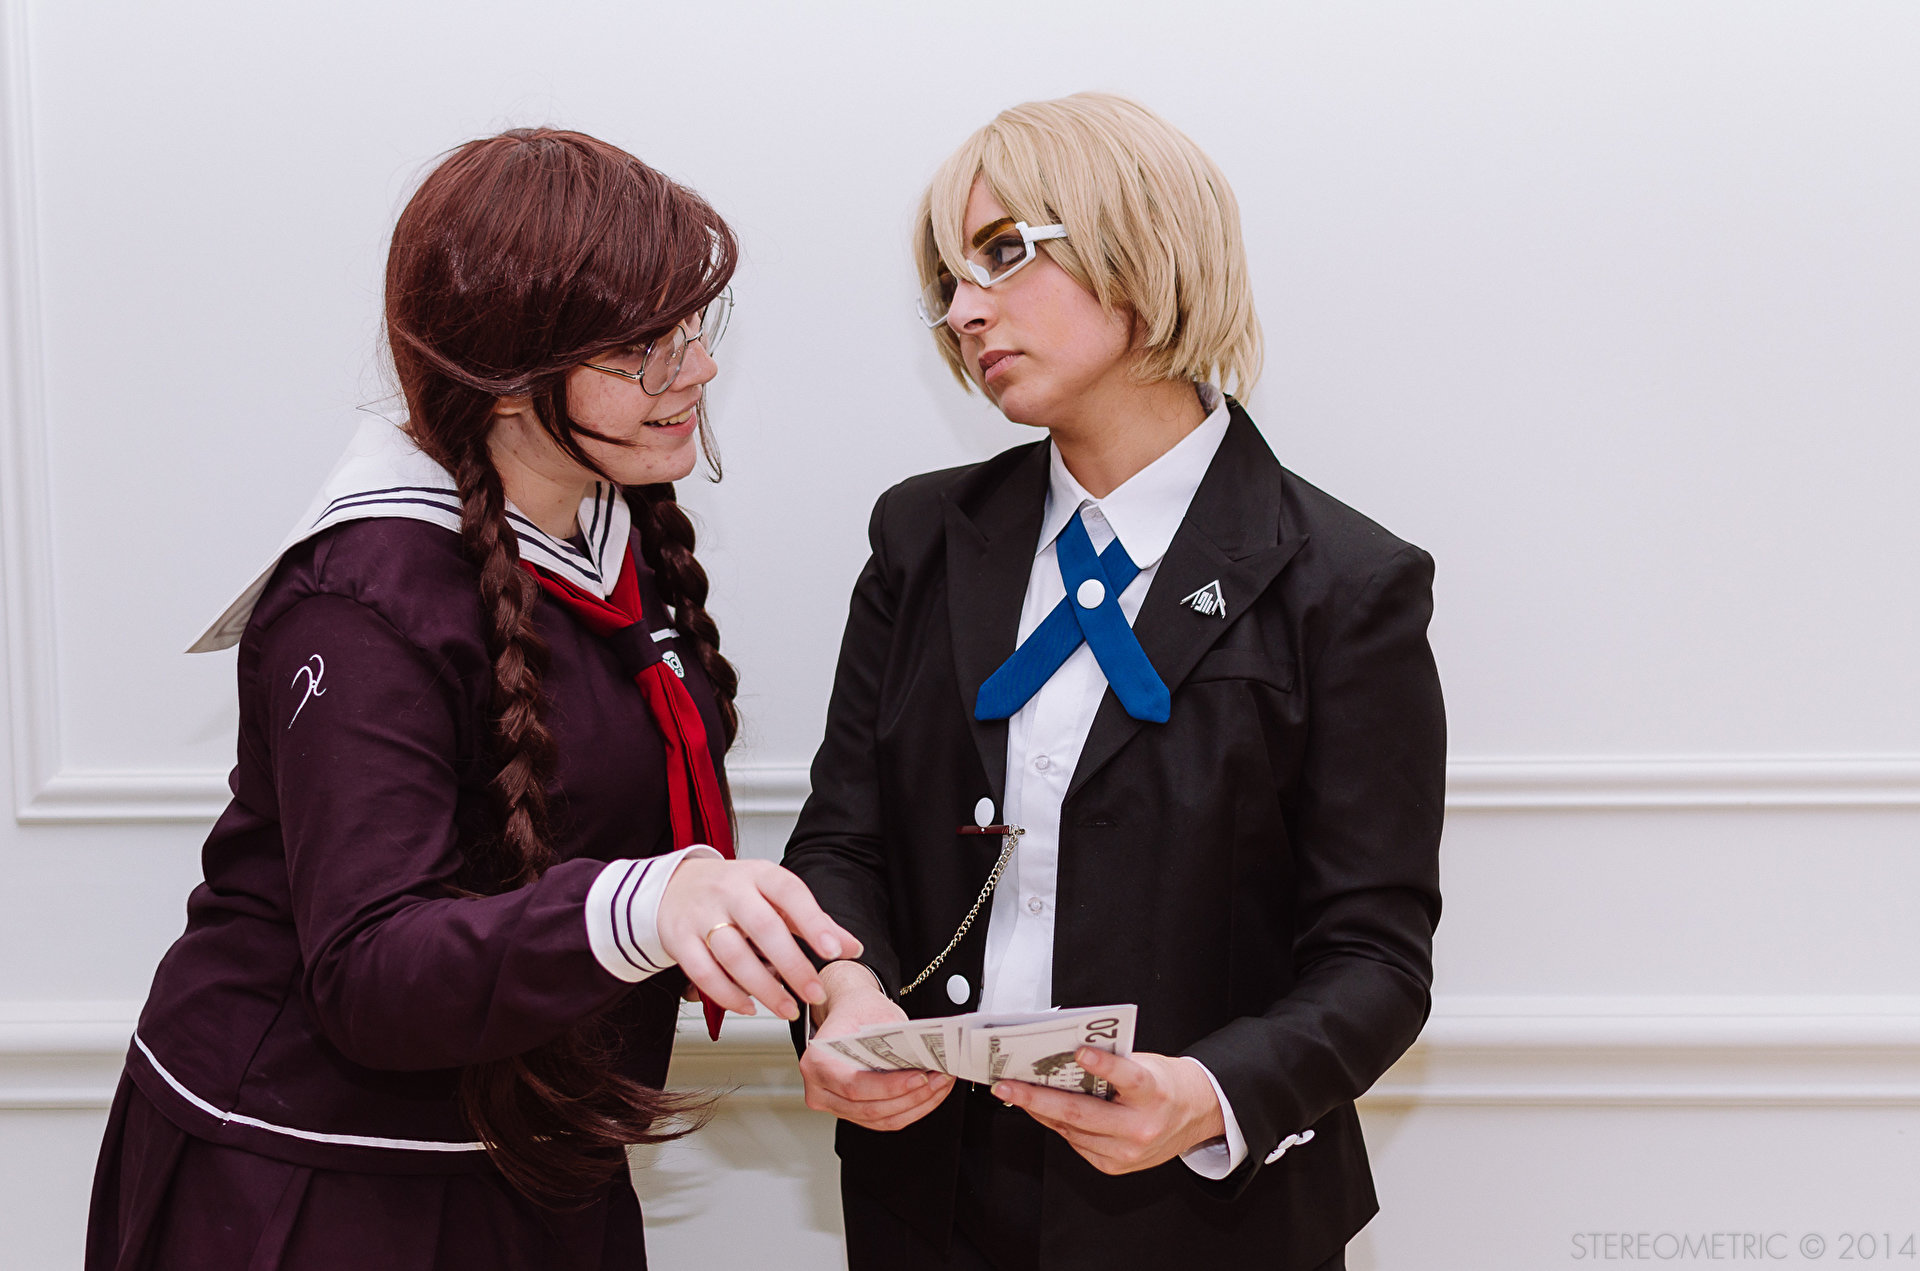 Cospix.net photo featuring Stereometric and Lunar Prince Cosplay